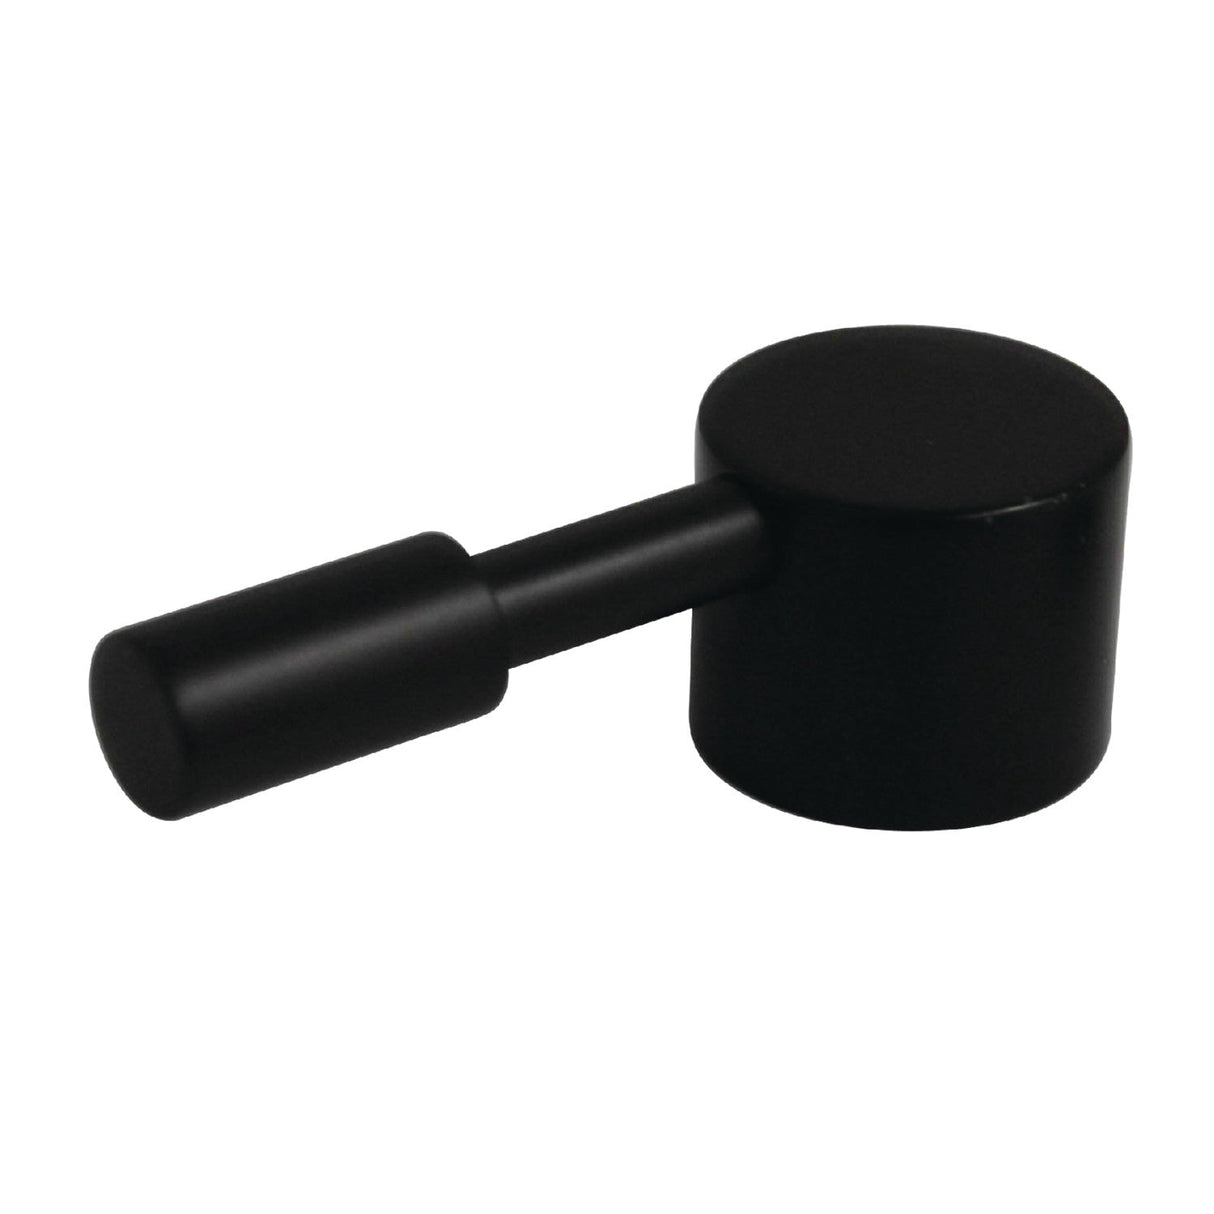 Concord KSH8195DL Metal Lever Handle, Oil Rubbed Bronze